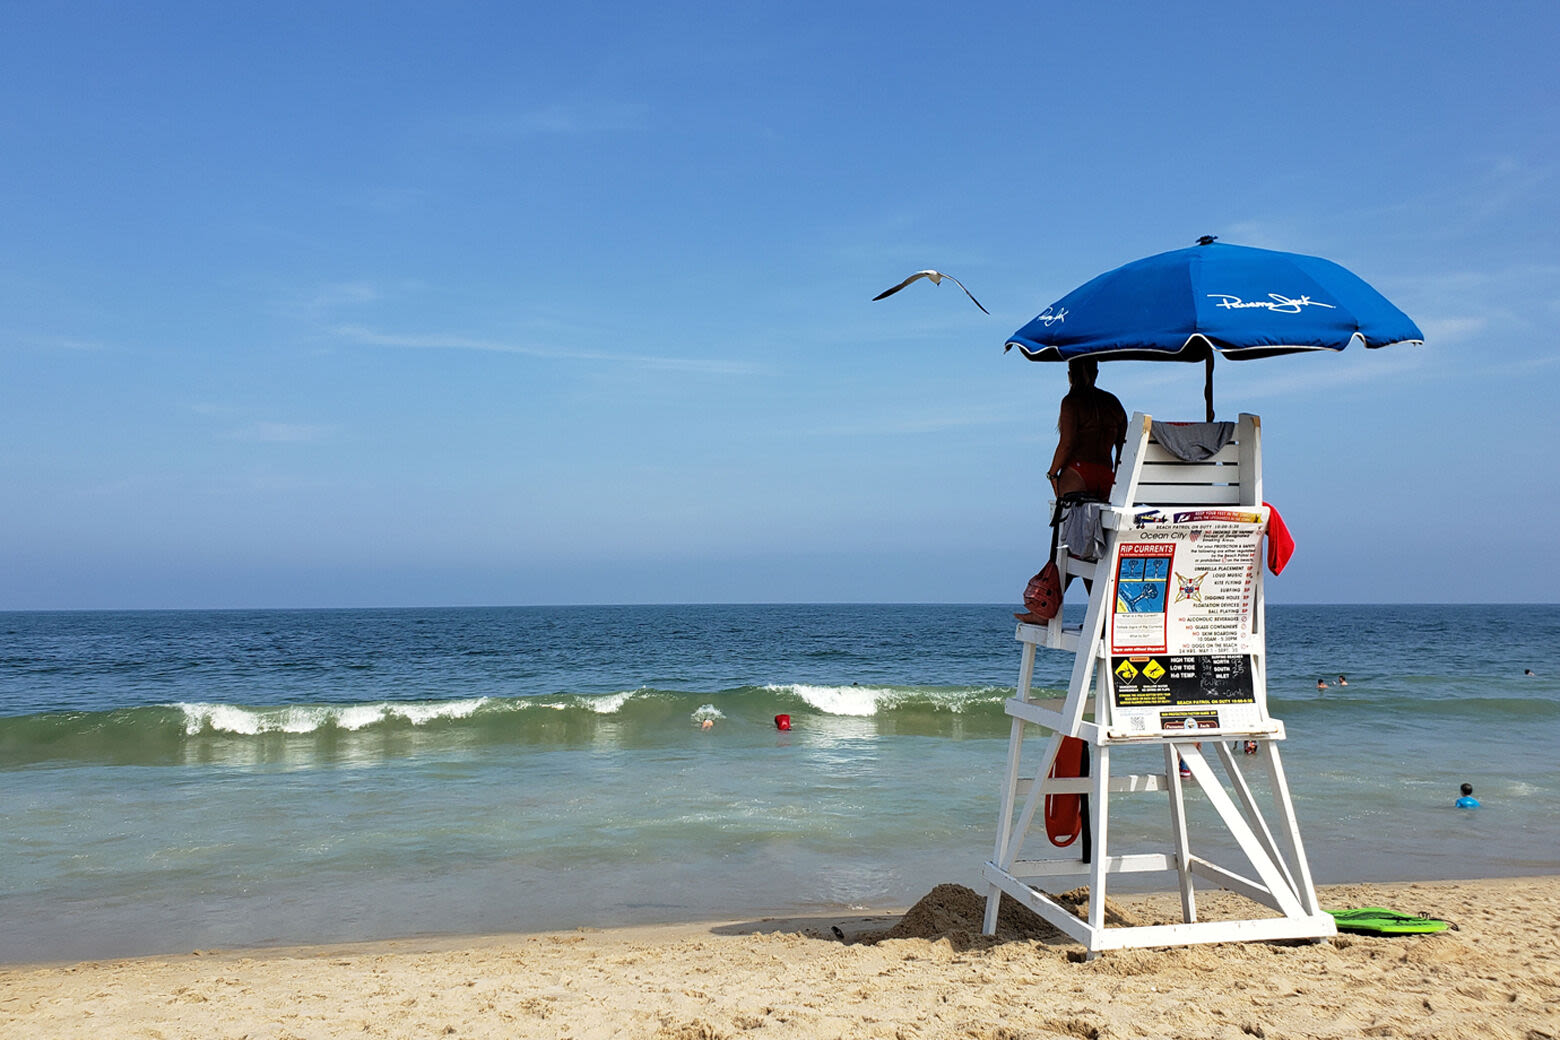 ‘Swim across it like your backyard pool’: Lifeguards offer rip current safety tips for Memorial Day weekend - WTOP News